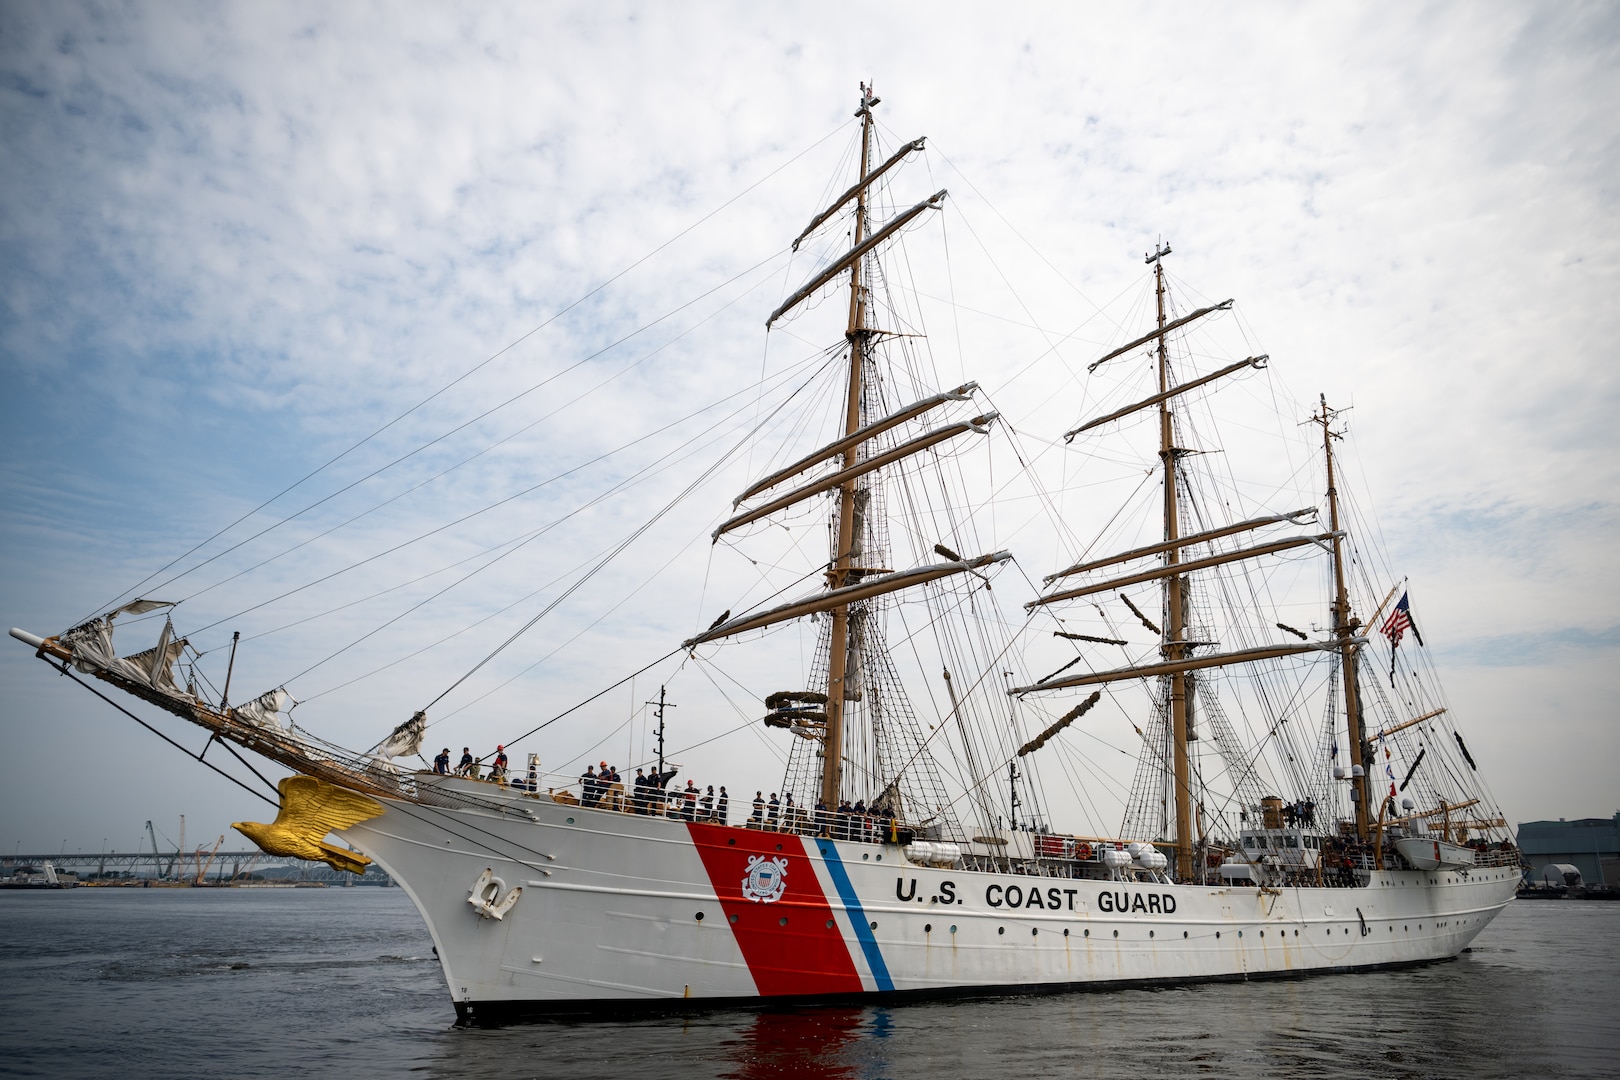 The crew of the Coast Guard Barque Eagle (WIX 327) returns to homeport in New London, August 10, 2023. This year, crew, cadets, and officer candidates sailed over 16,800 nautical miles, traveling to the Azores, Netherlands, Norway, Denmark, Finland, and Sweden as part of their annual training cruise, after departing New London, April 8, 2023. (U.S. Coast Guard Photo by Petty Officer 2nd Class Taylor Bacon)